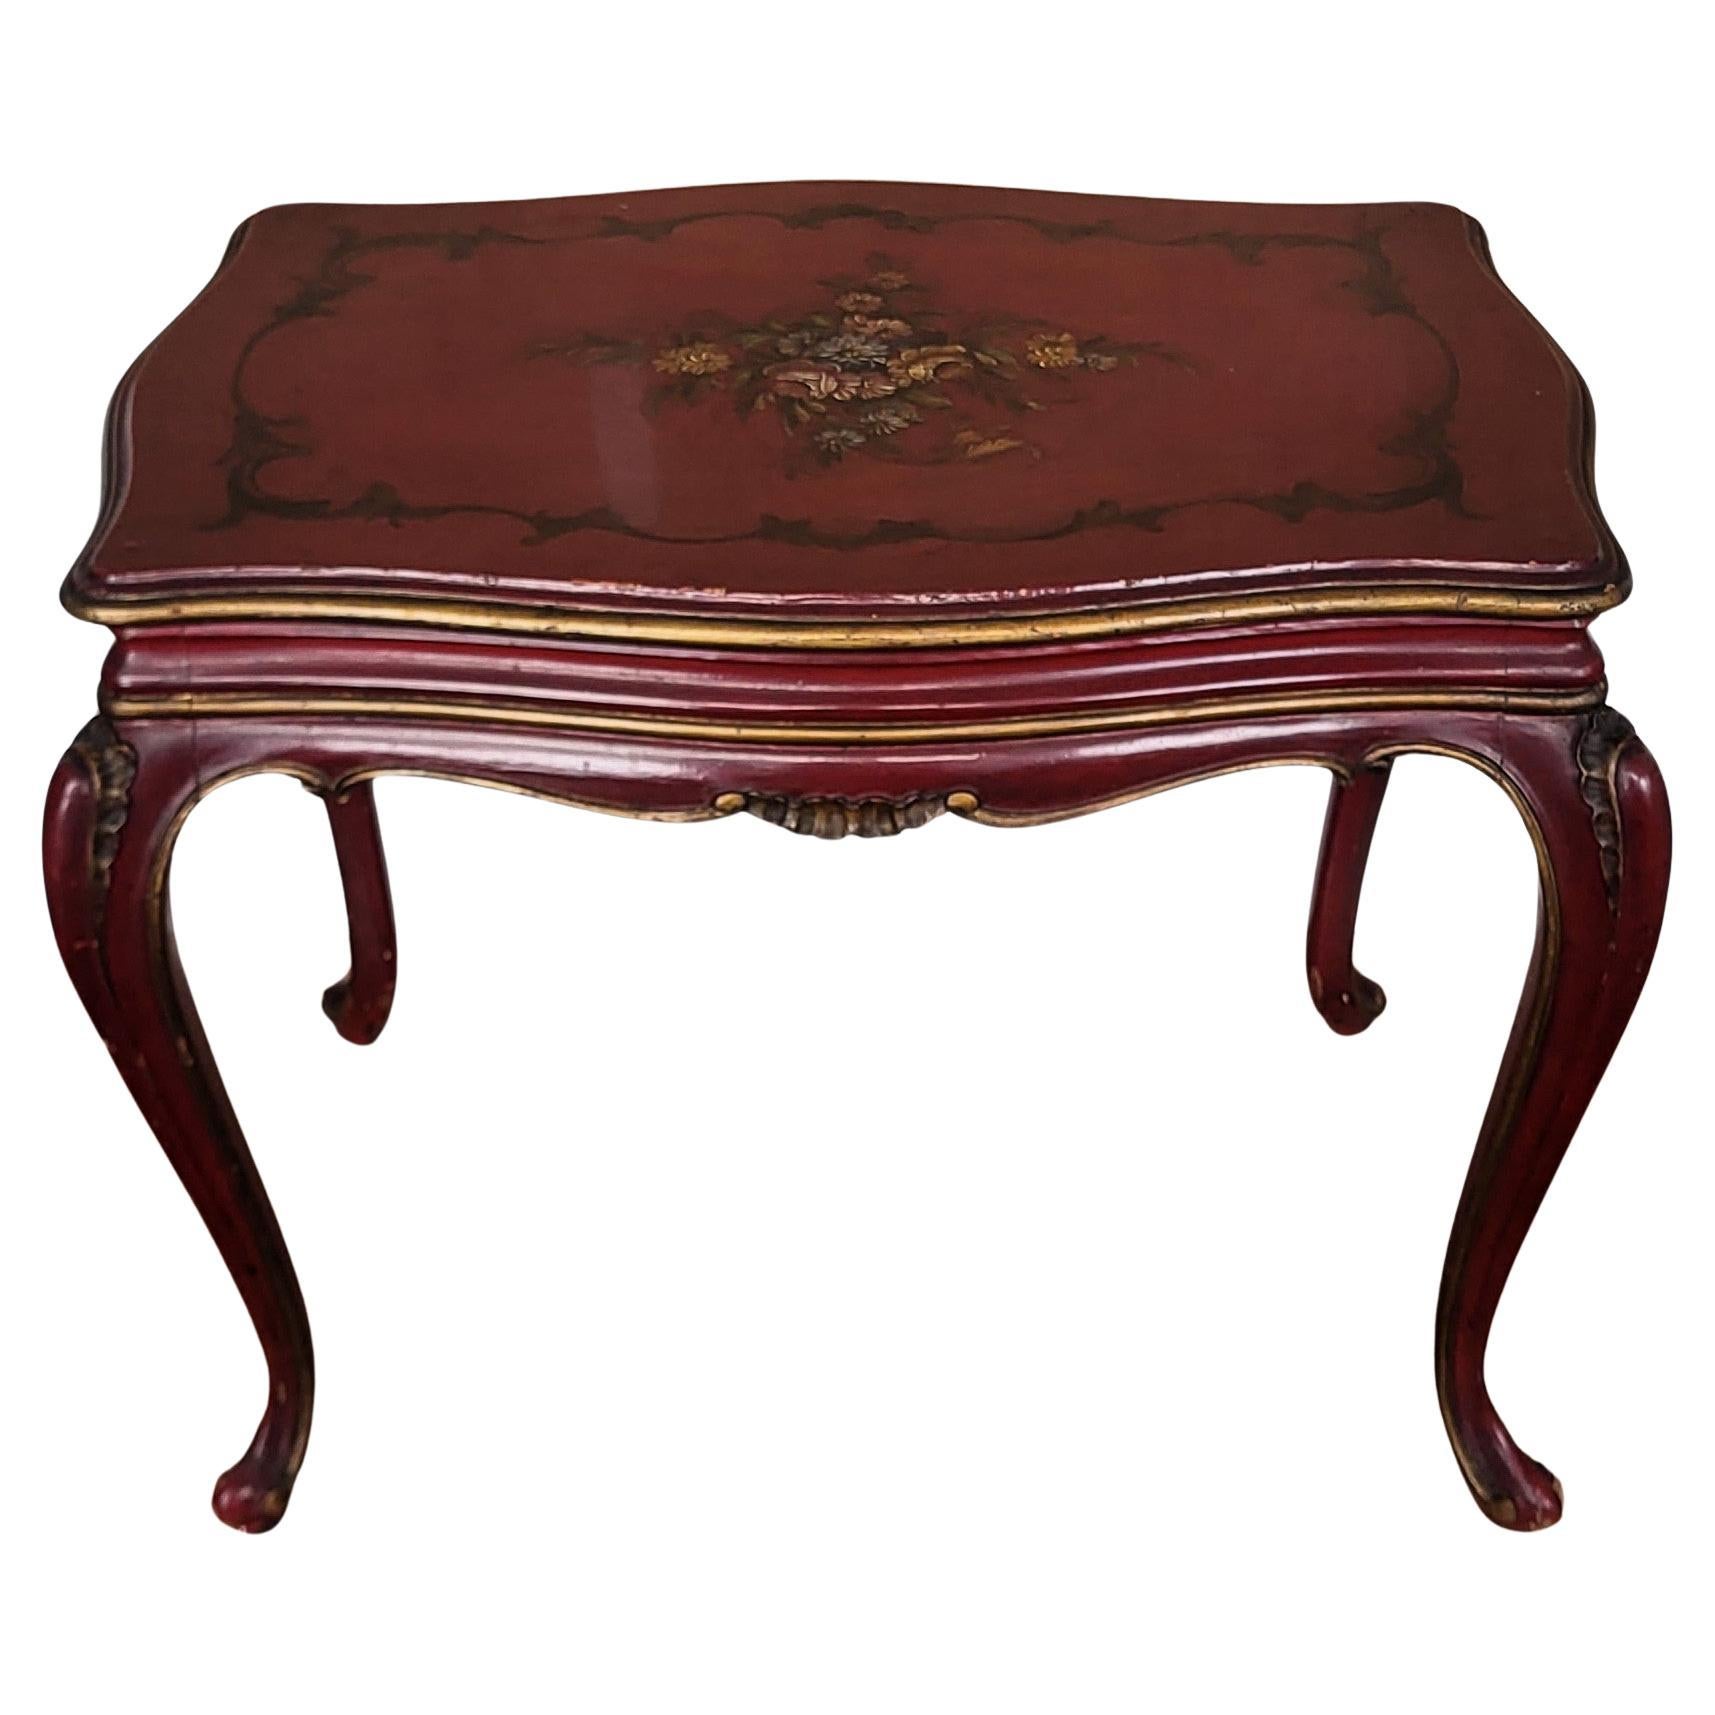 Neoclassical Italian Walnut Chinoiserie Red Bordeaux Sofa Table or Side Table